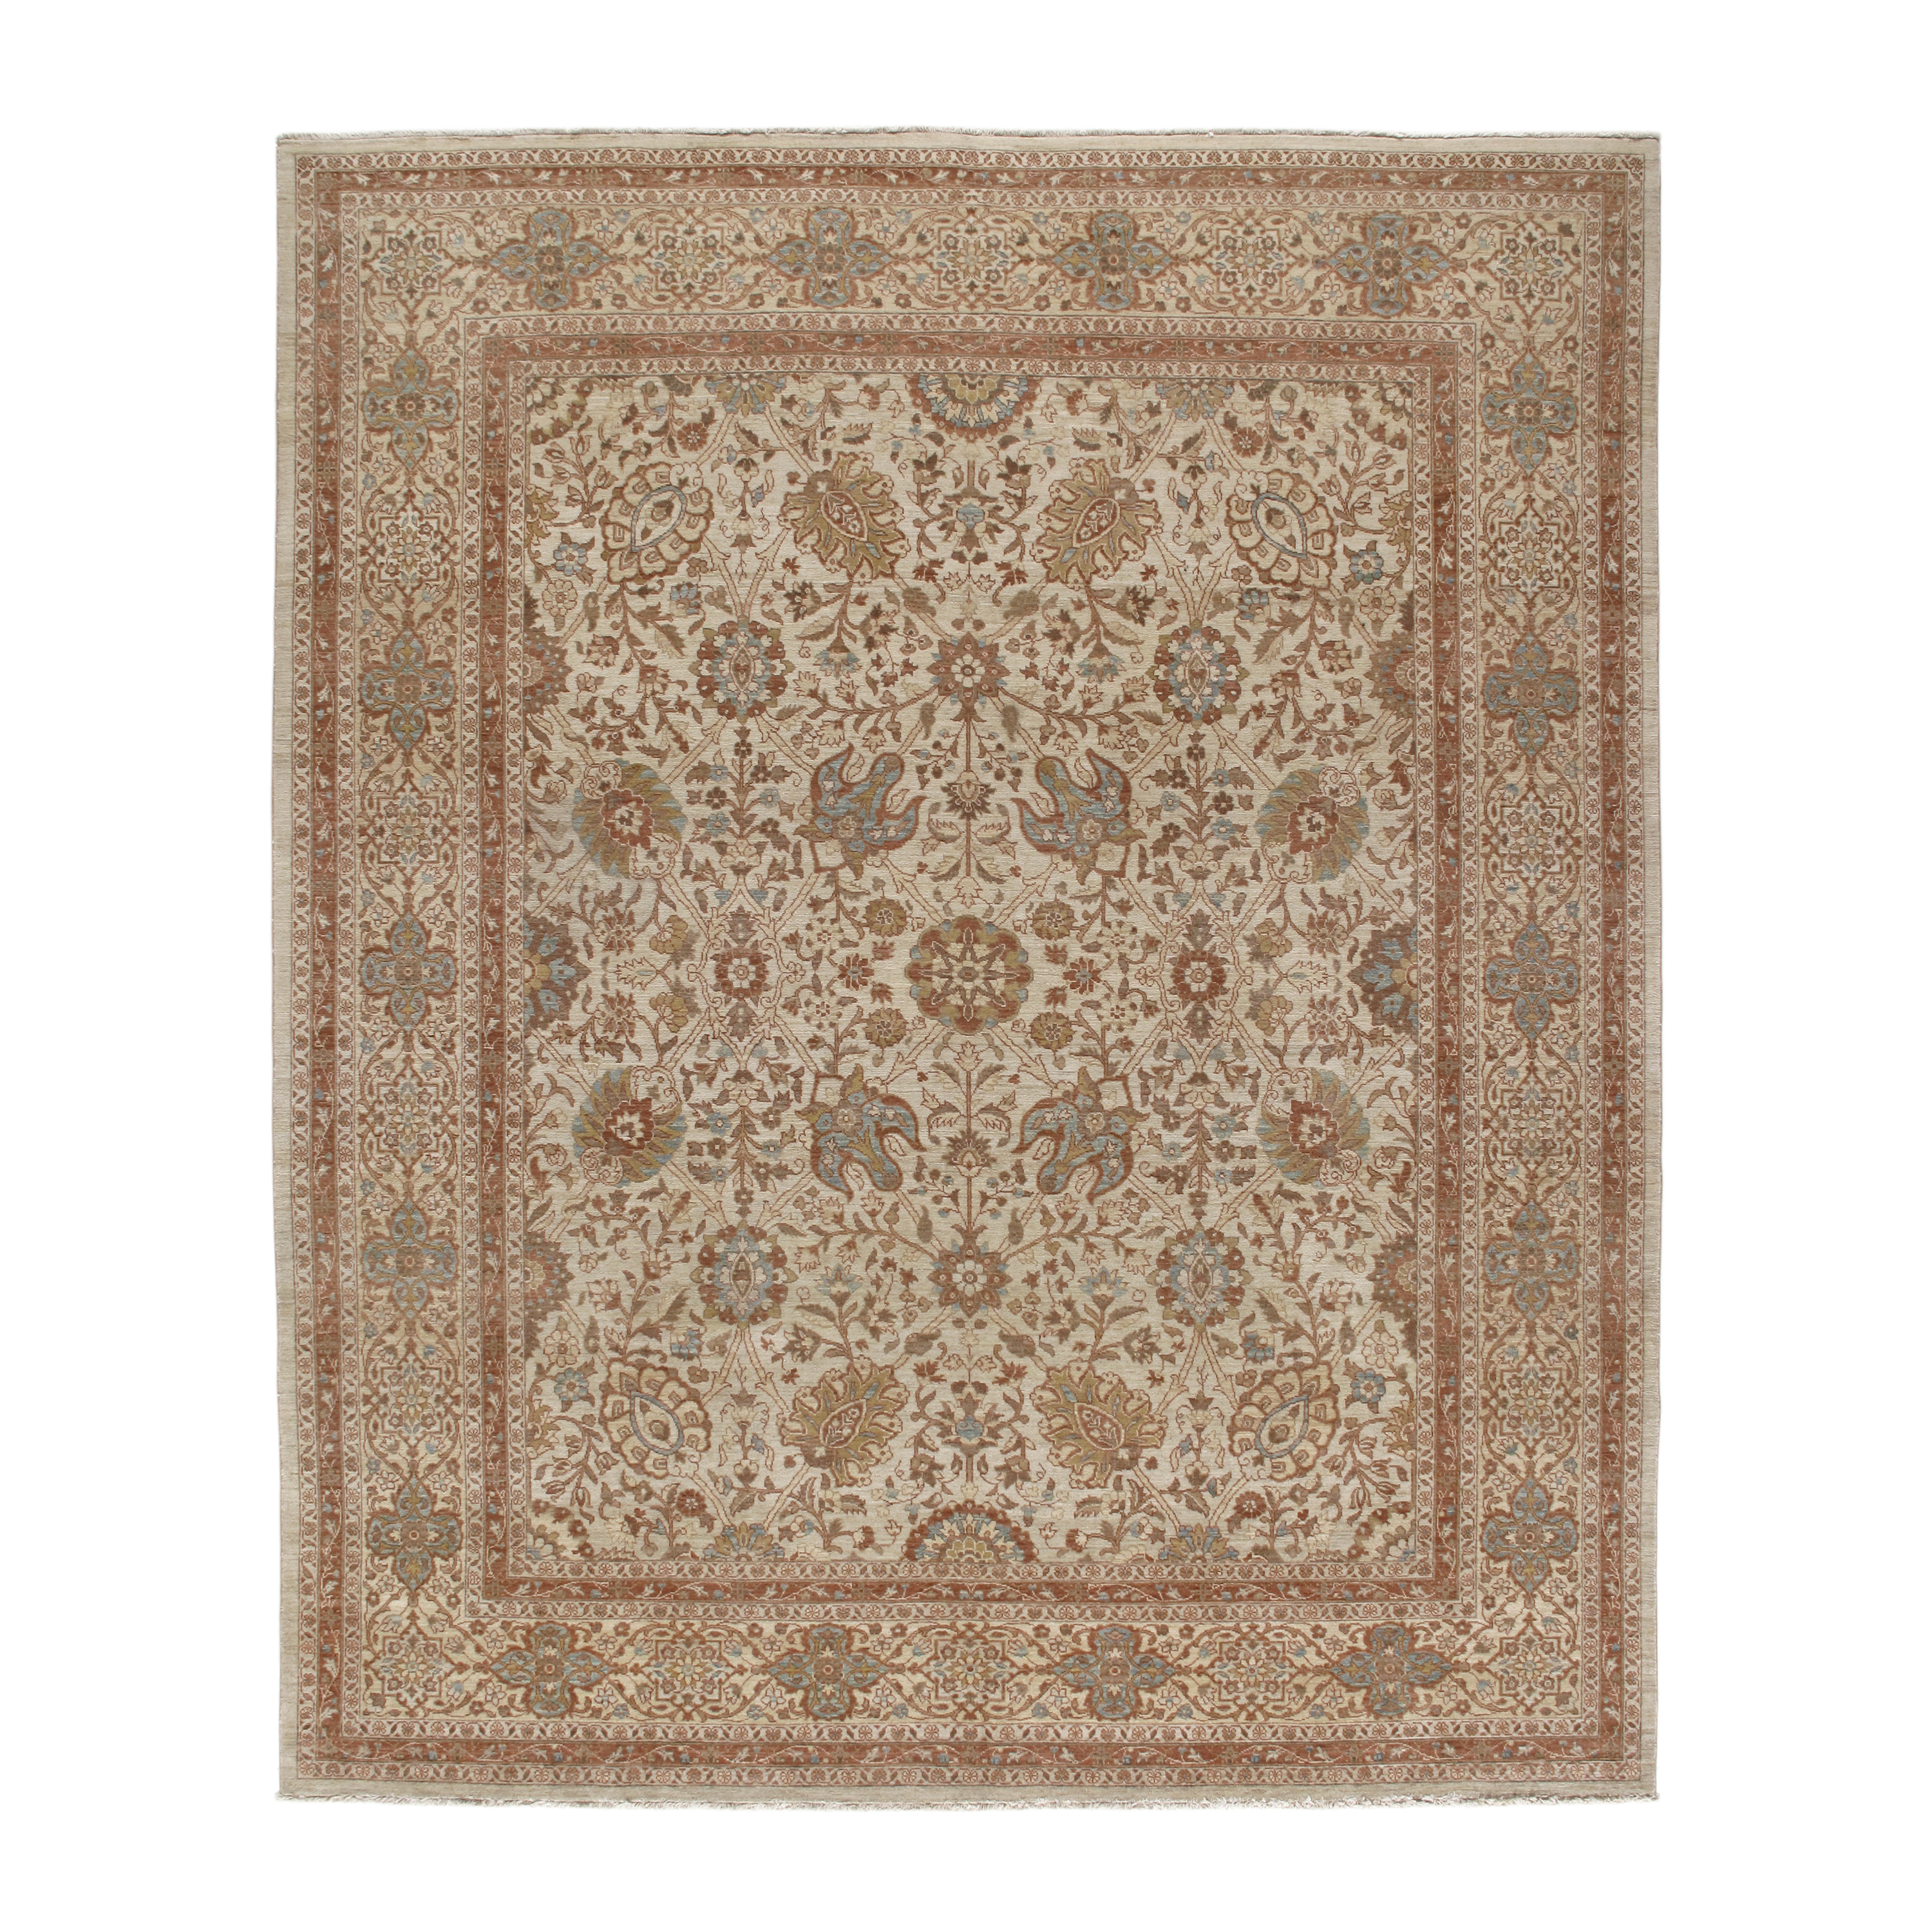 This Persian Tabriz rug is made with the finest handspun wool and its hand-knotted.